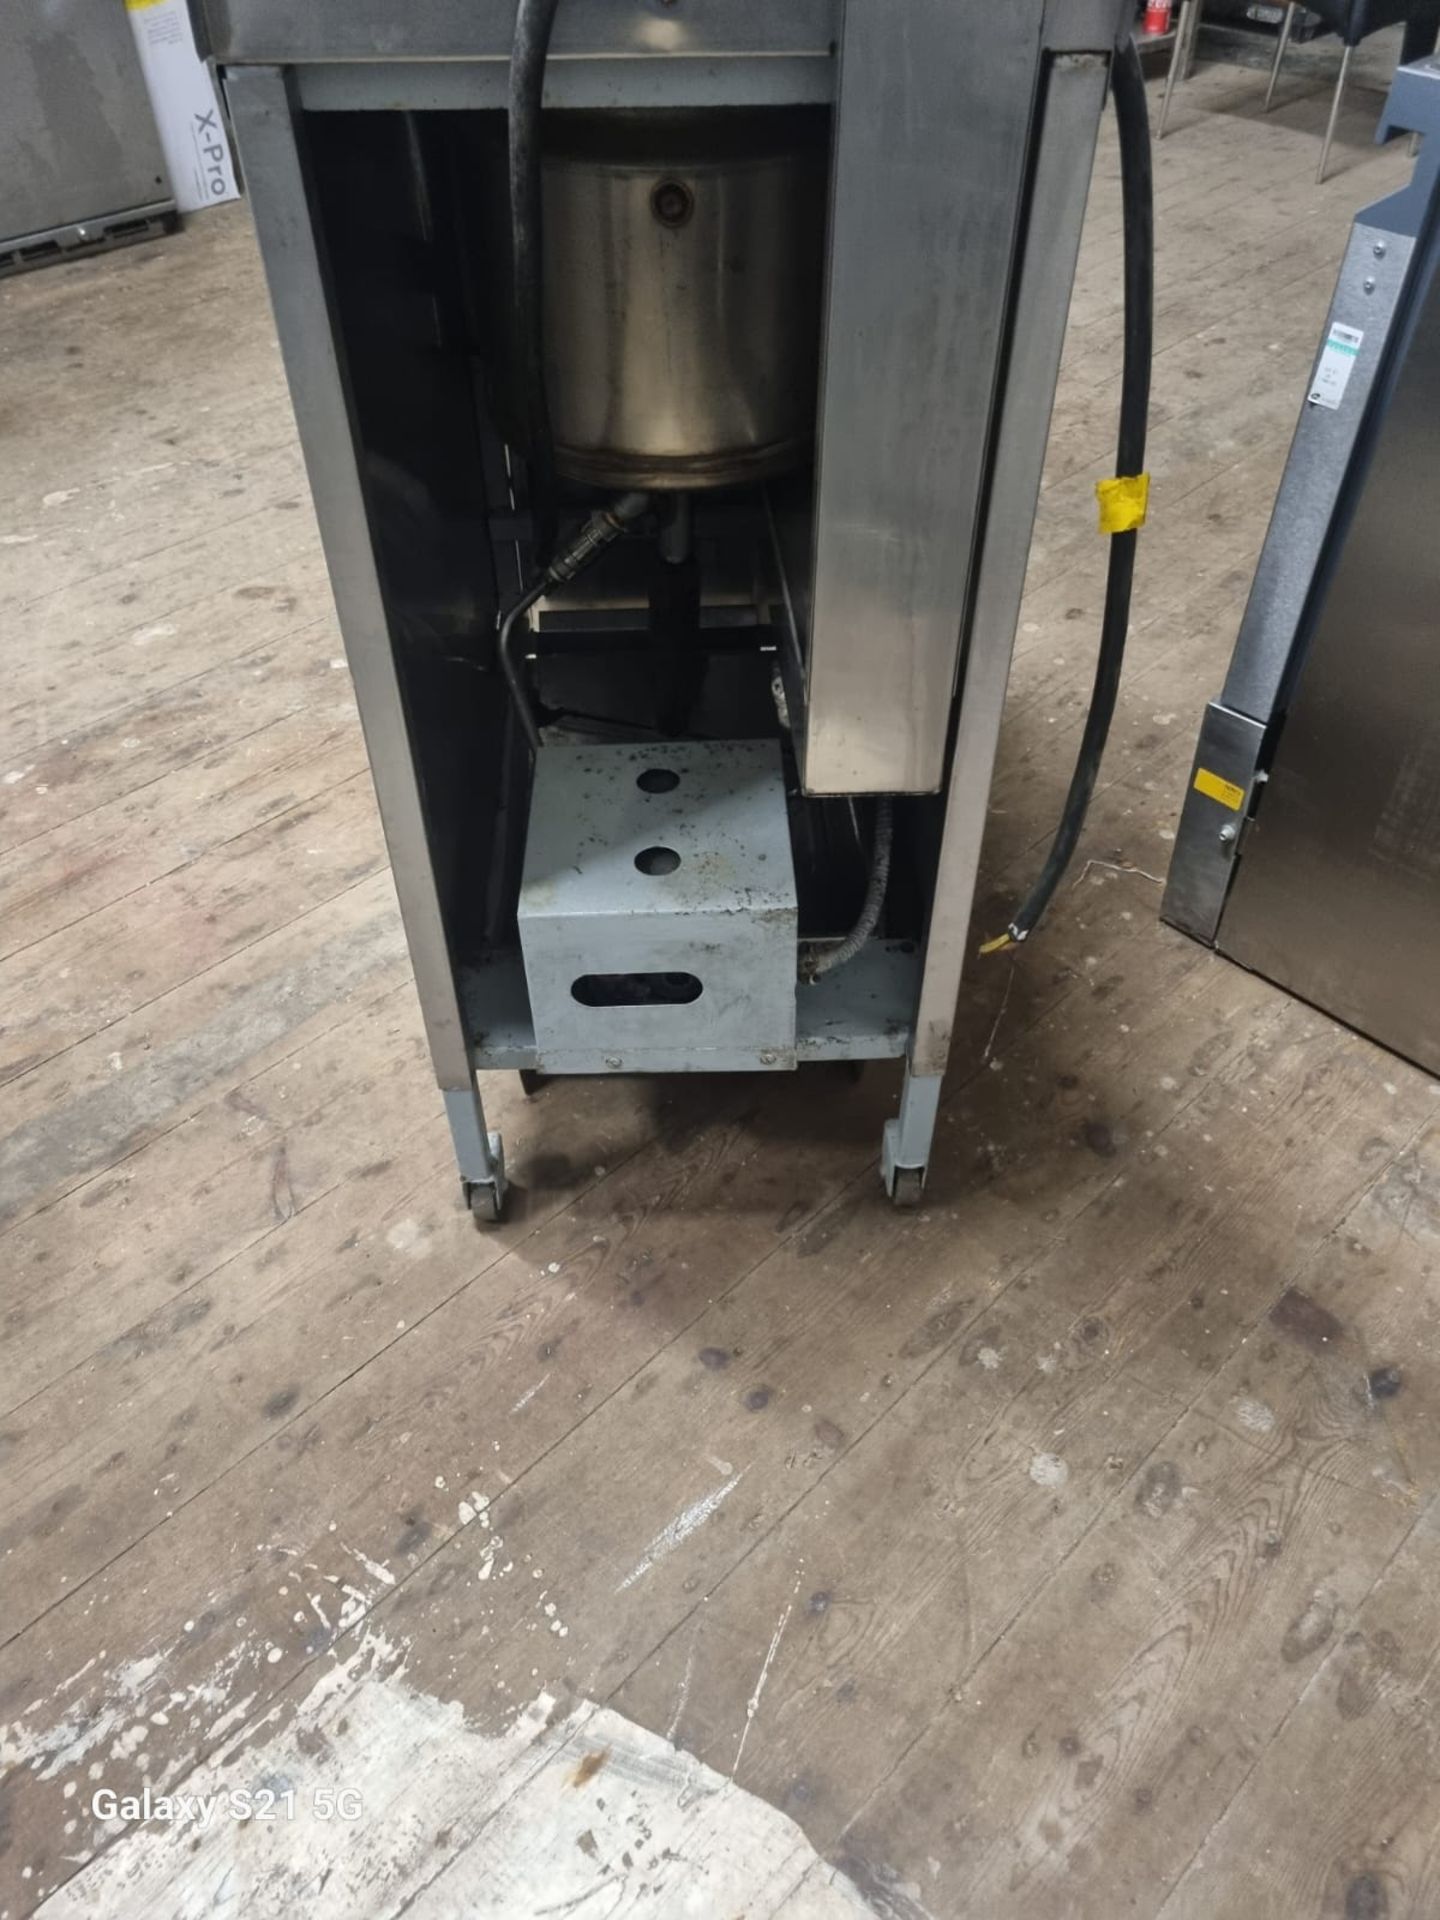 VIZU PRESSURE FRYER ELECTRIC - SINGLE OR 3 PHASE - FULLY RECONDITIONED  - Image 7 of 8